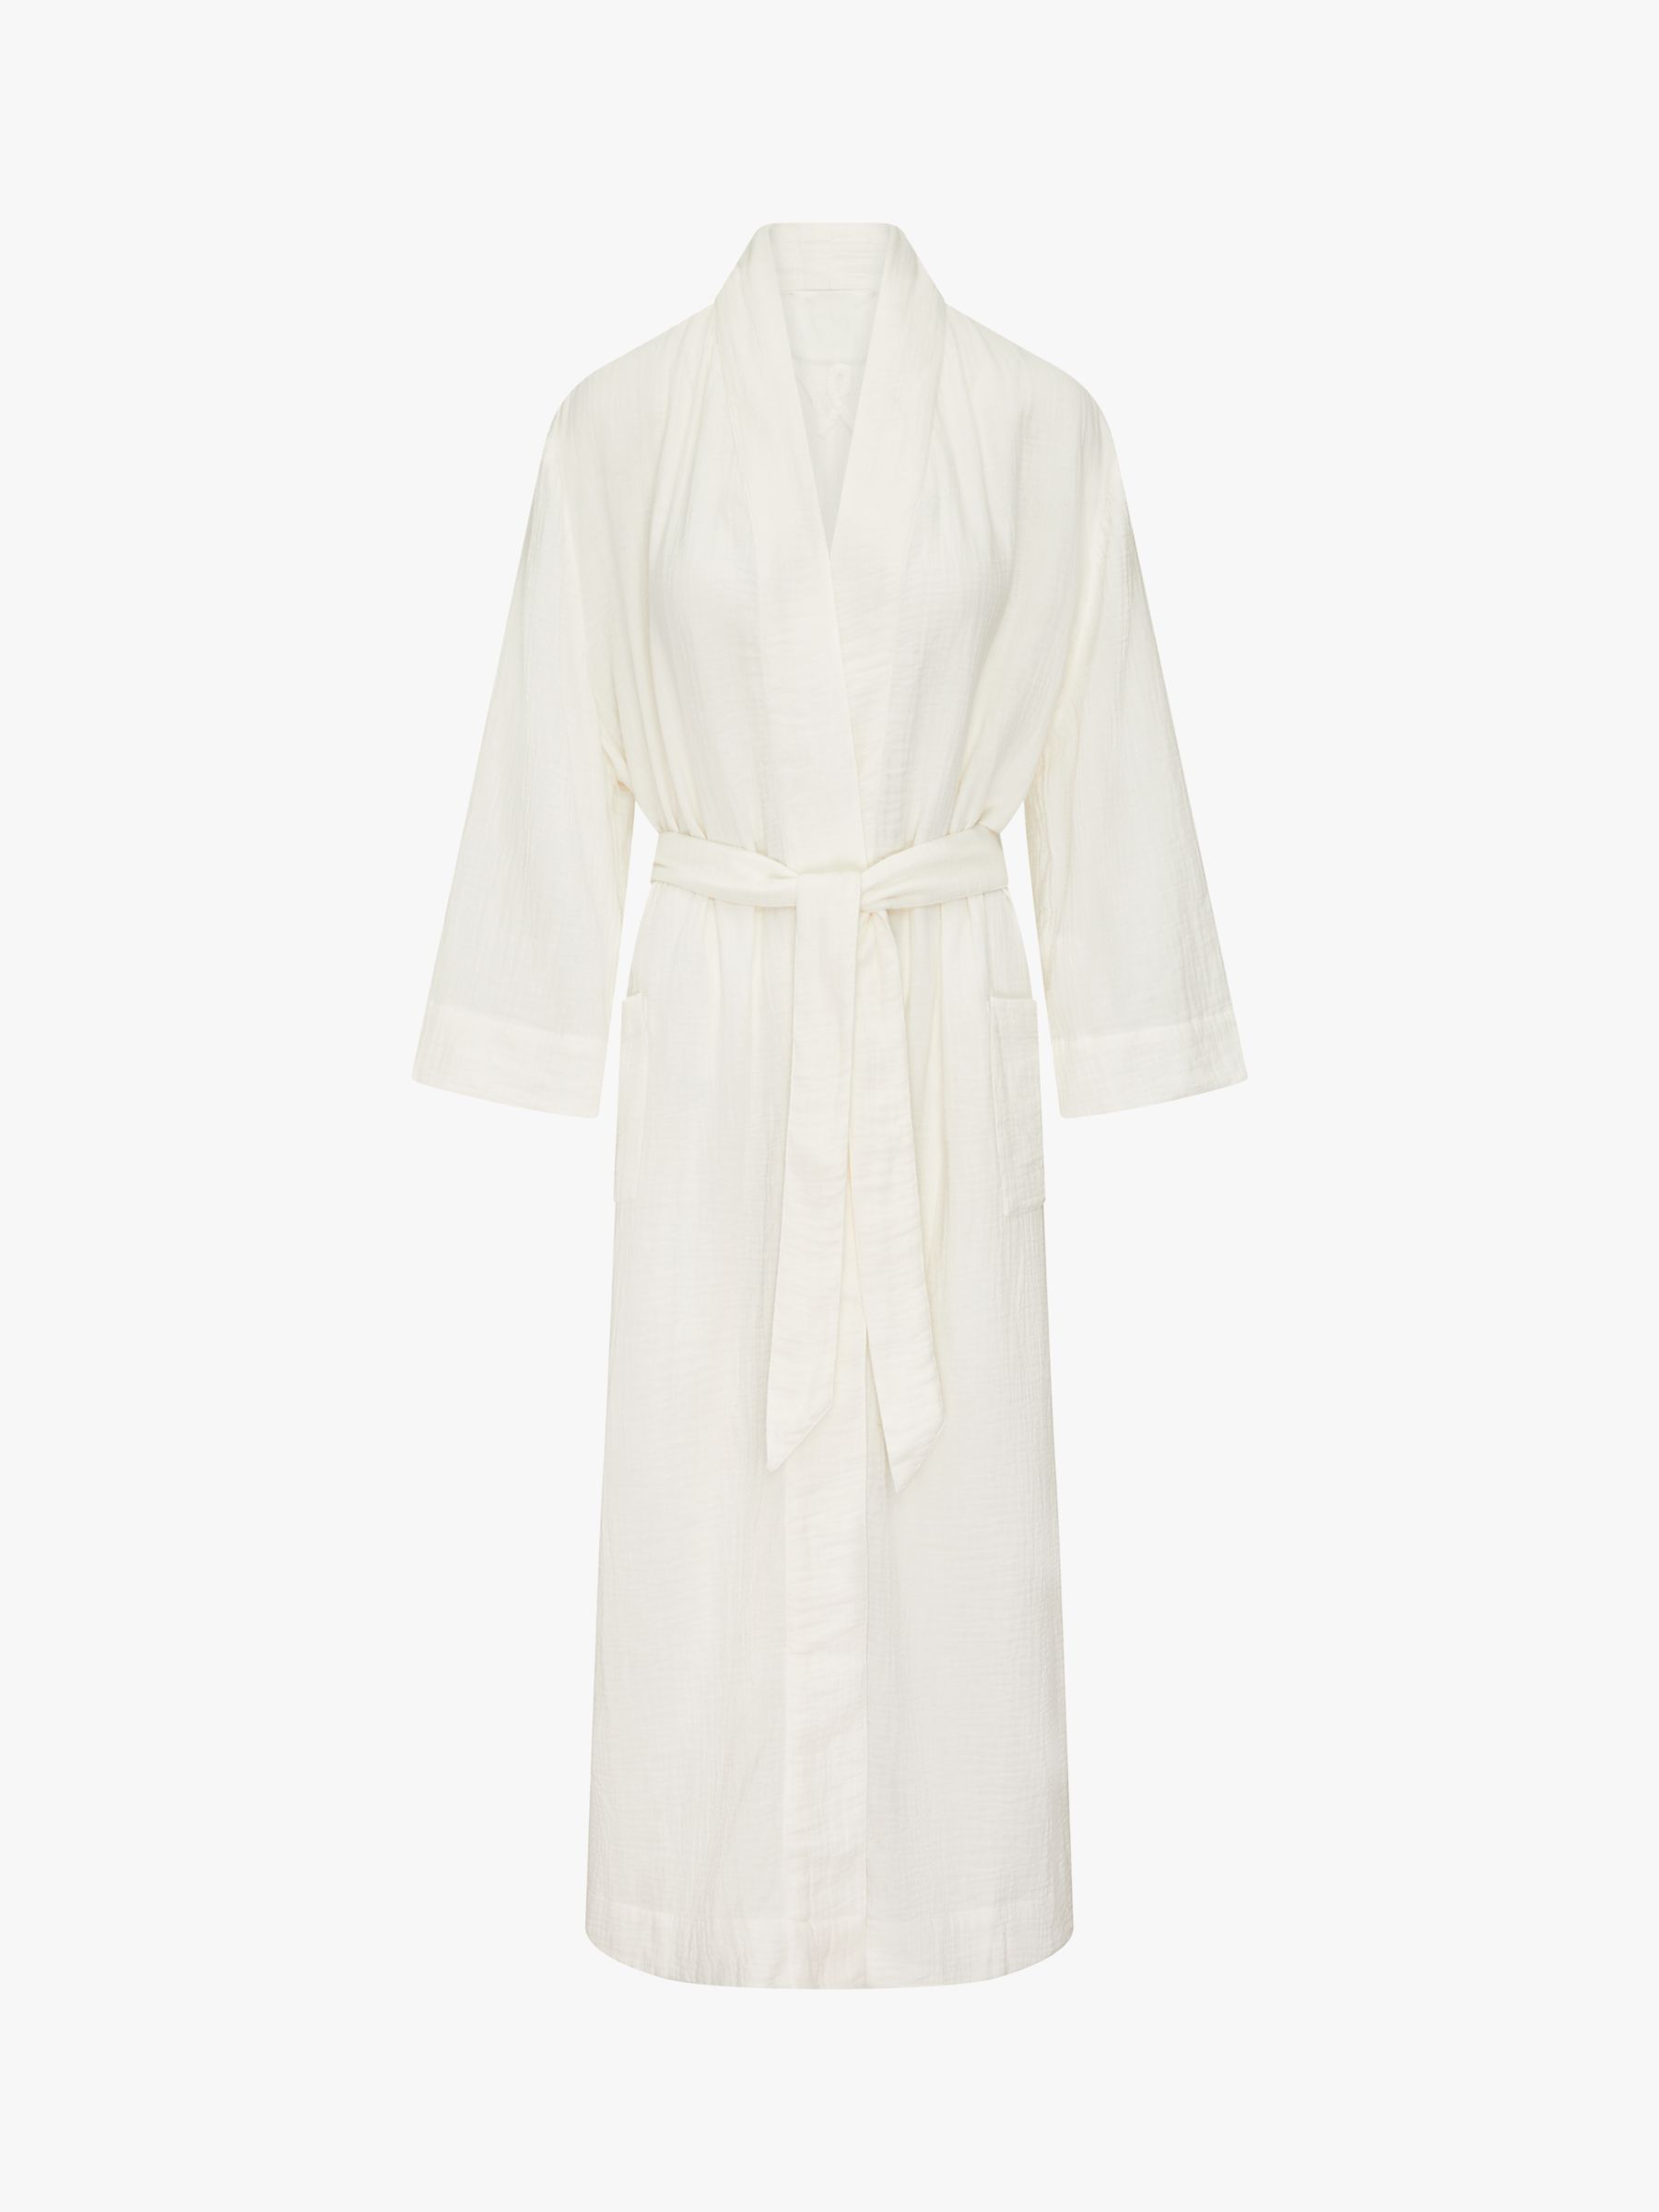 Buy Nudea Organic Cotton Belted Robe Online at johnlewis.com